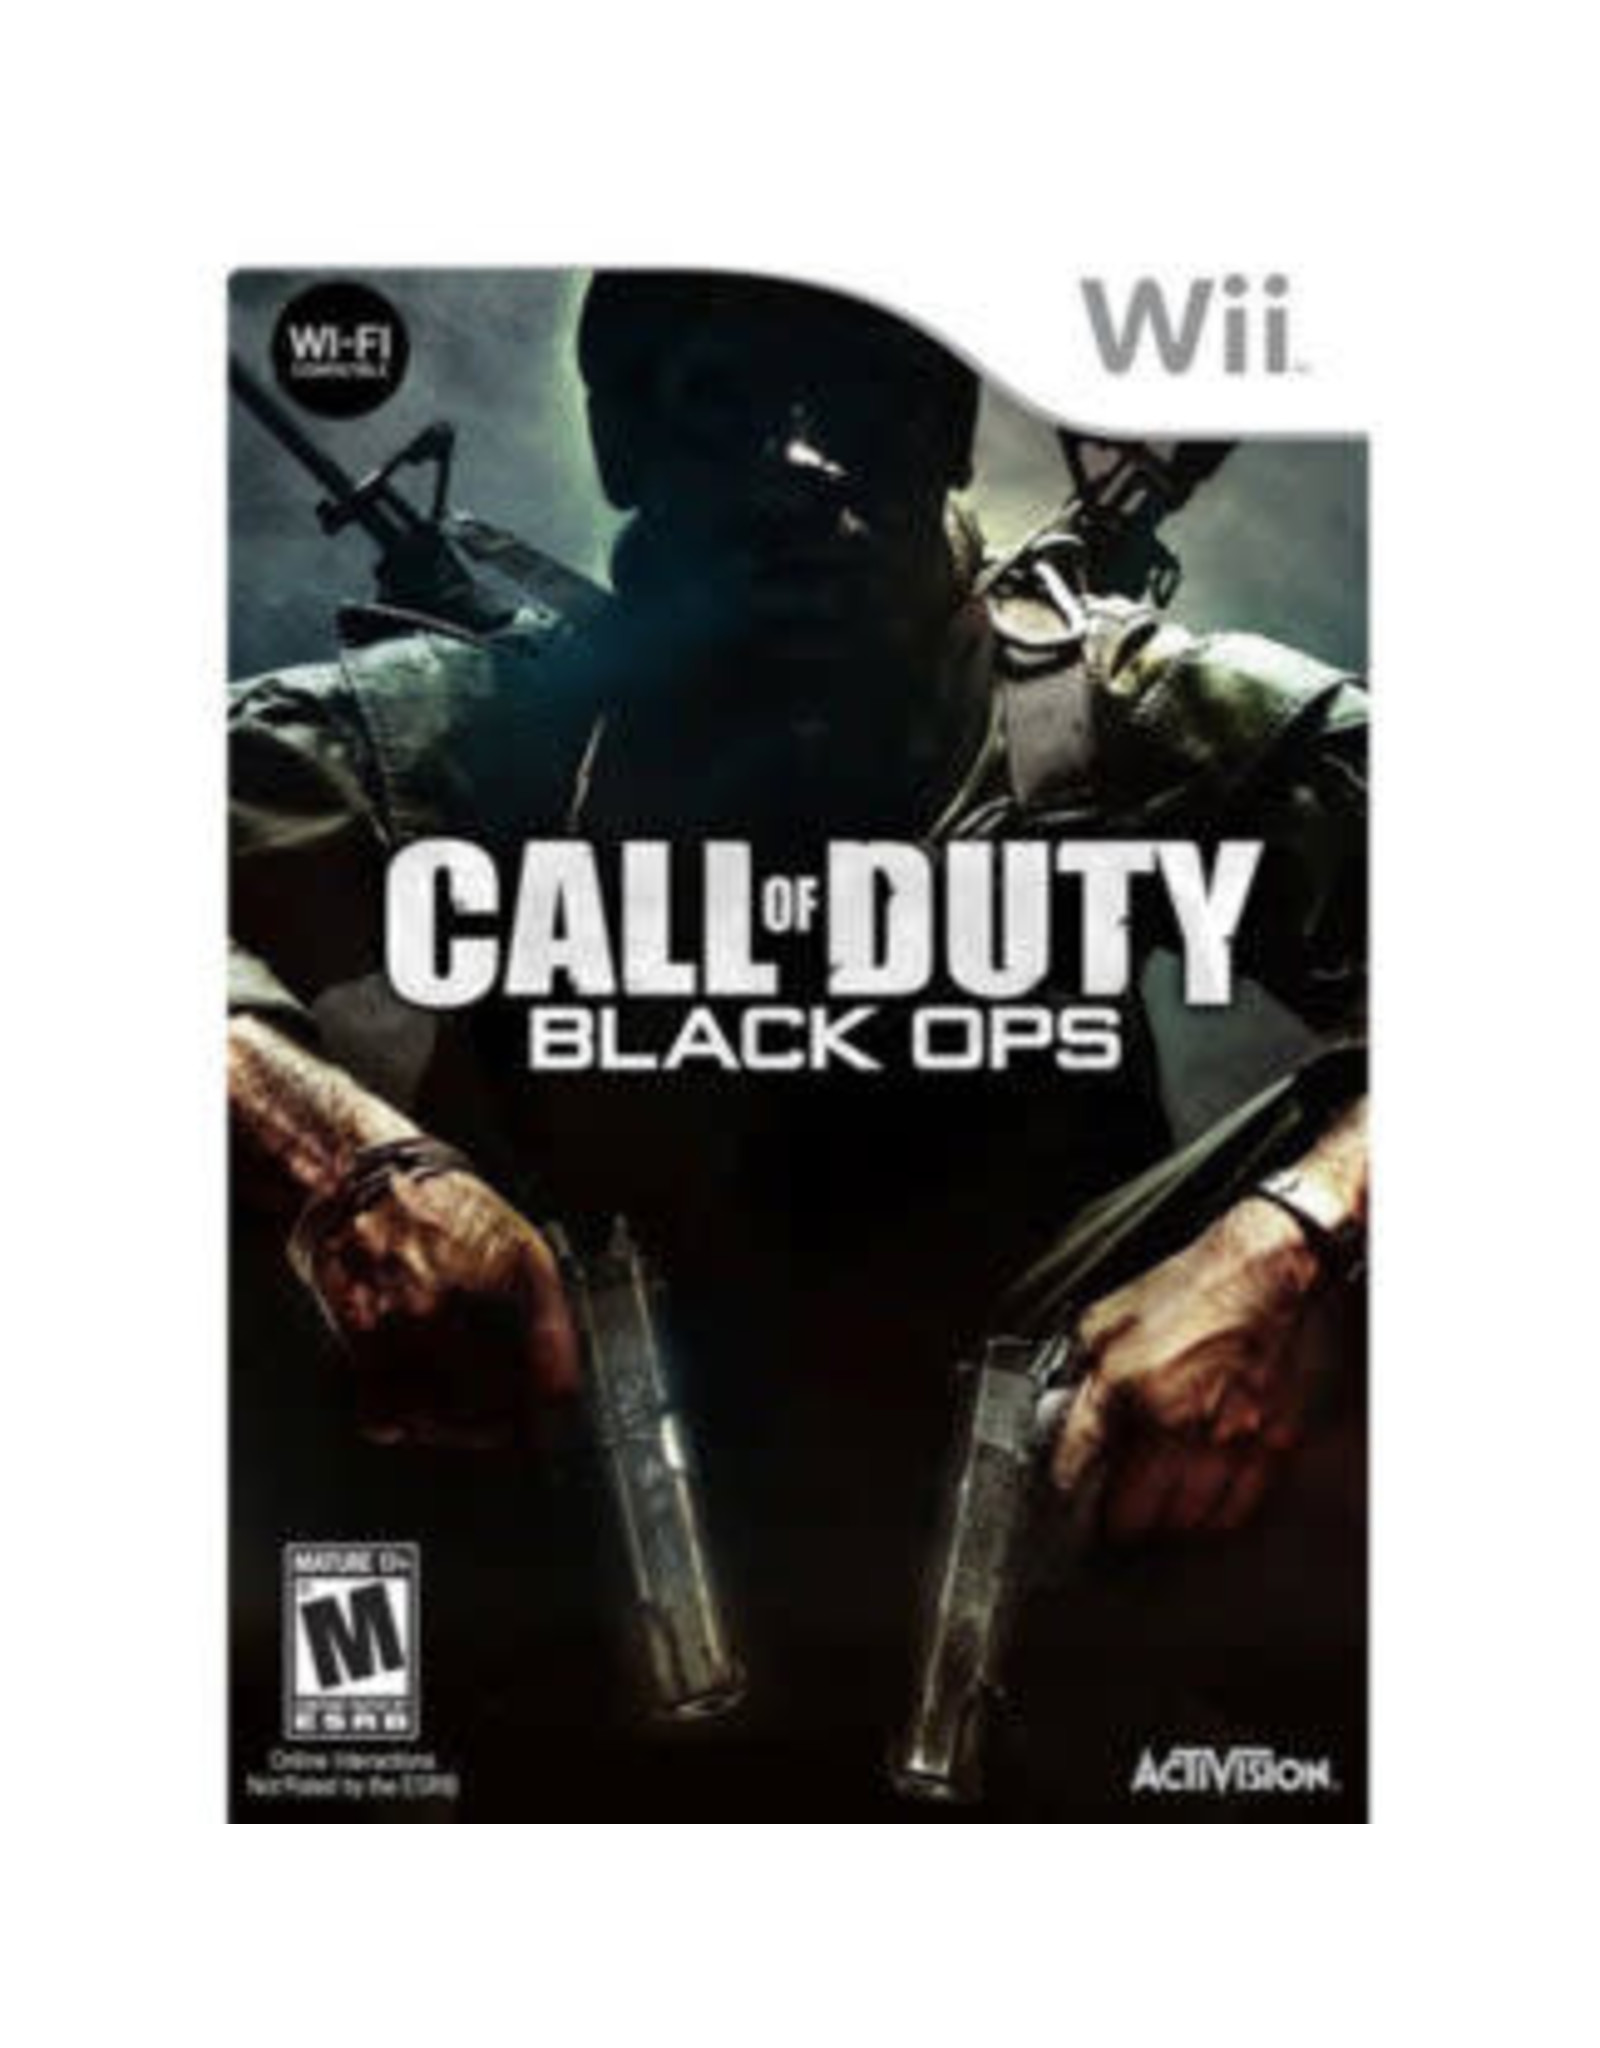 Wii Call of Duty Black Ops (Used)